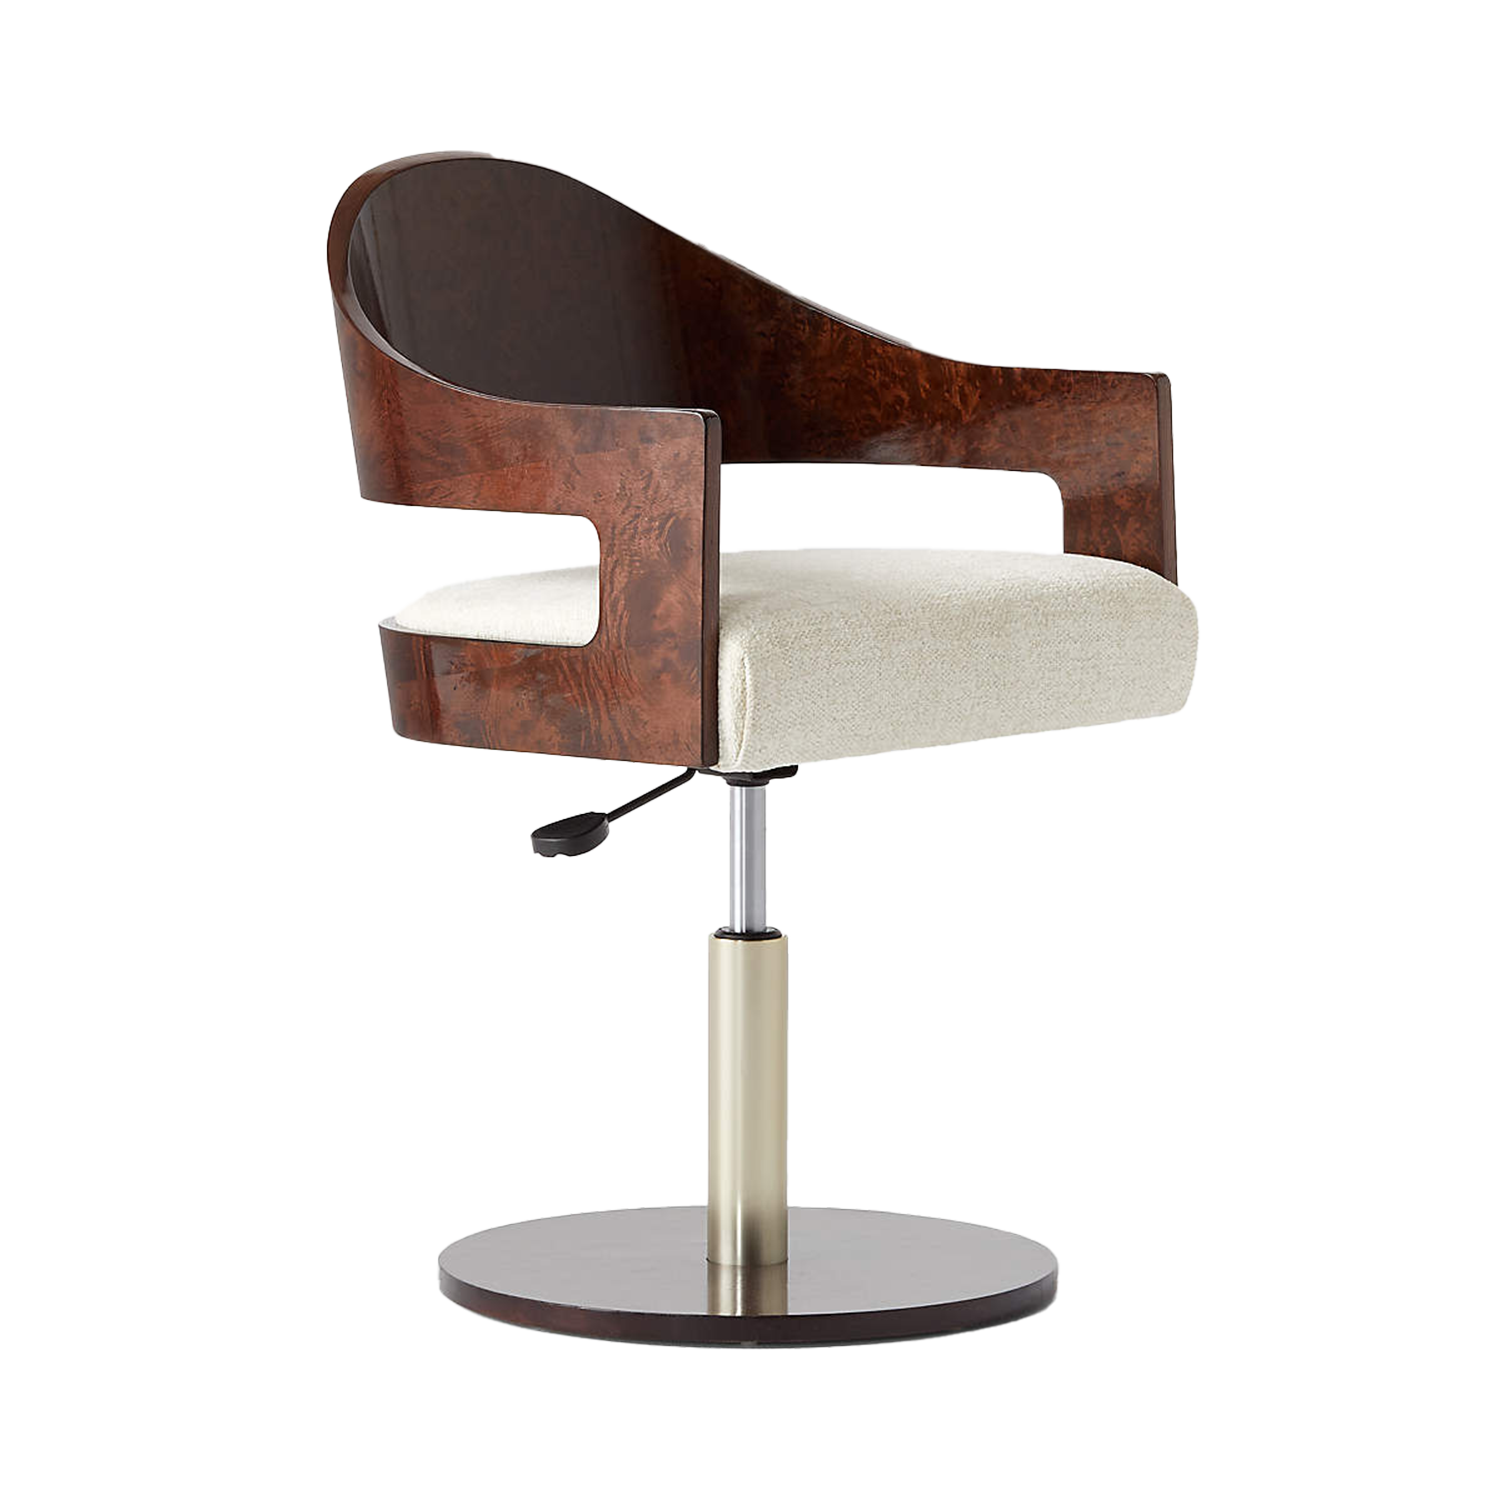 RENATO CHENILLE AND BURL WOOD OFFICE CHAIR RENATO CHENILLE AND BURL WOOD OFFICE CHAIR